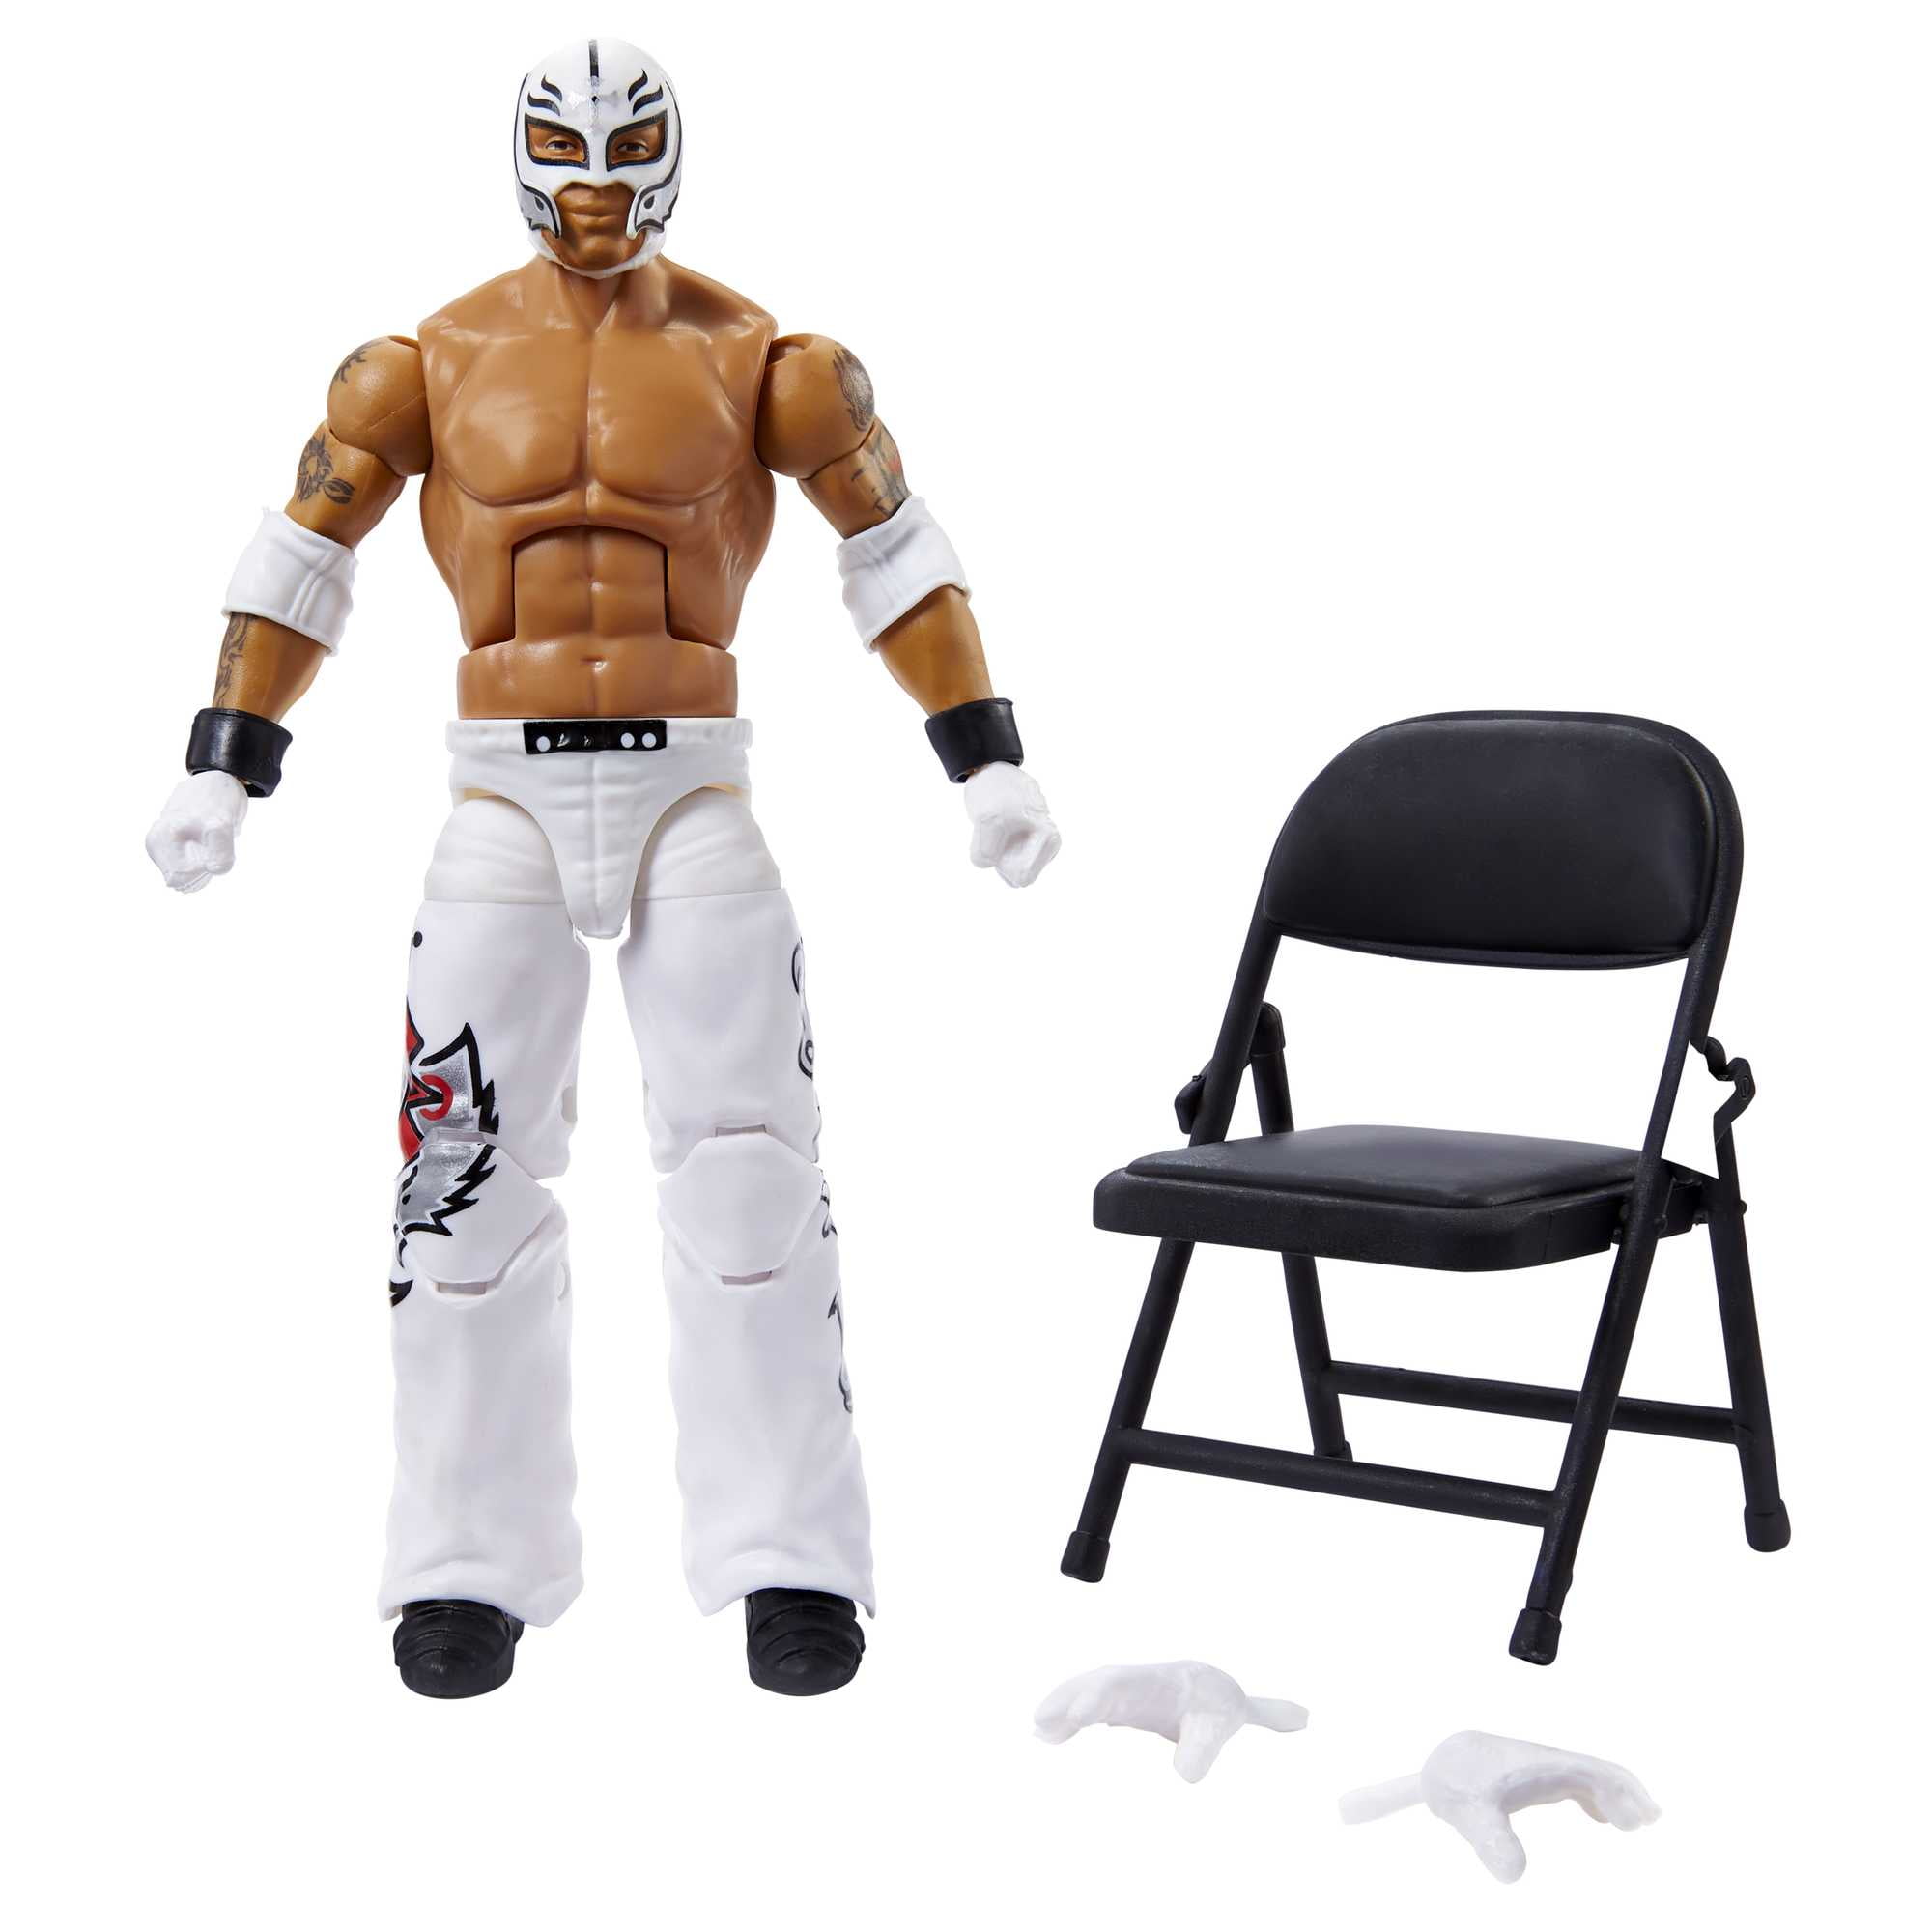 WWE Ruthless Aggression Elite Collection Action Figures with Accessories  (6-inch) (Styles May Vary) 